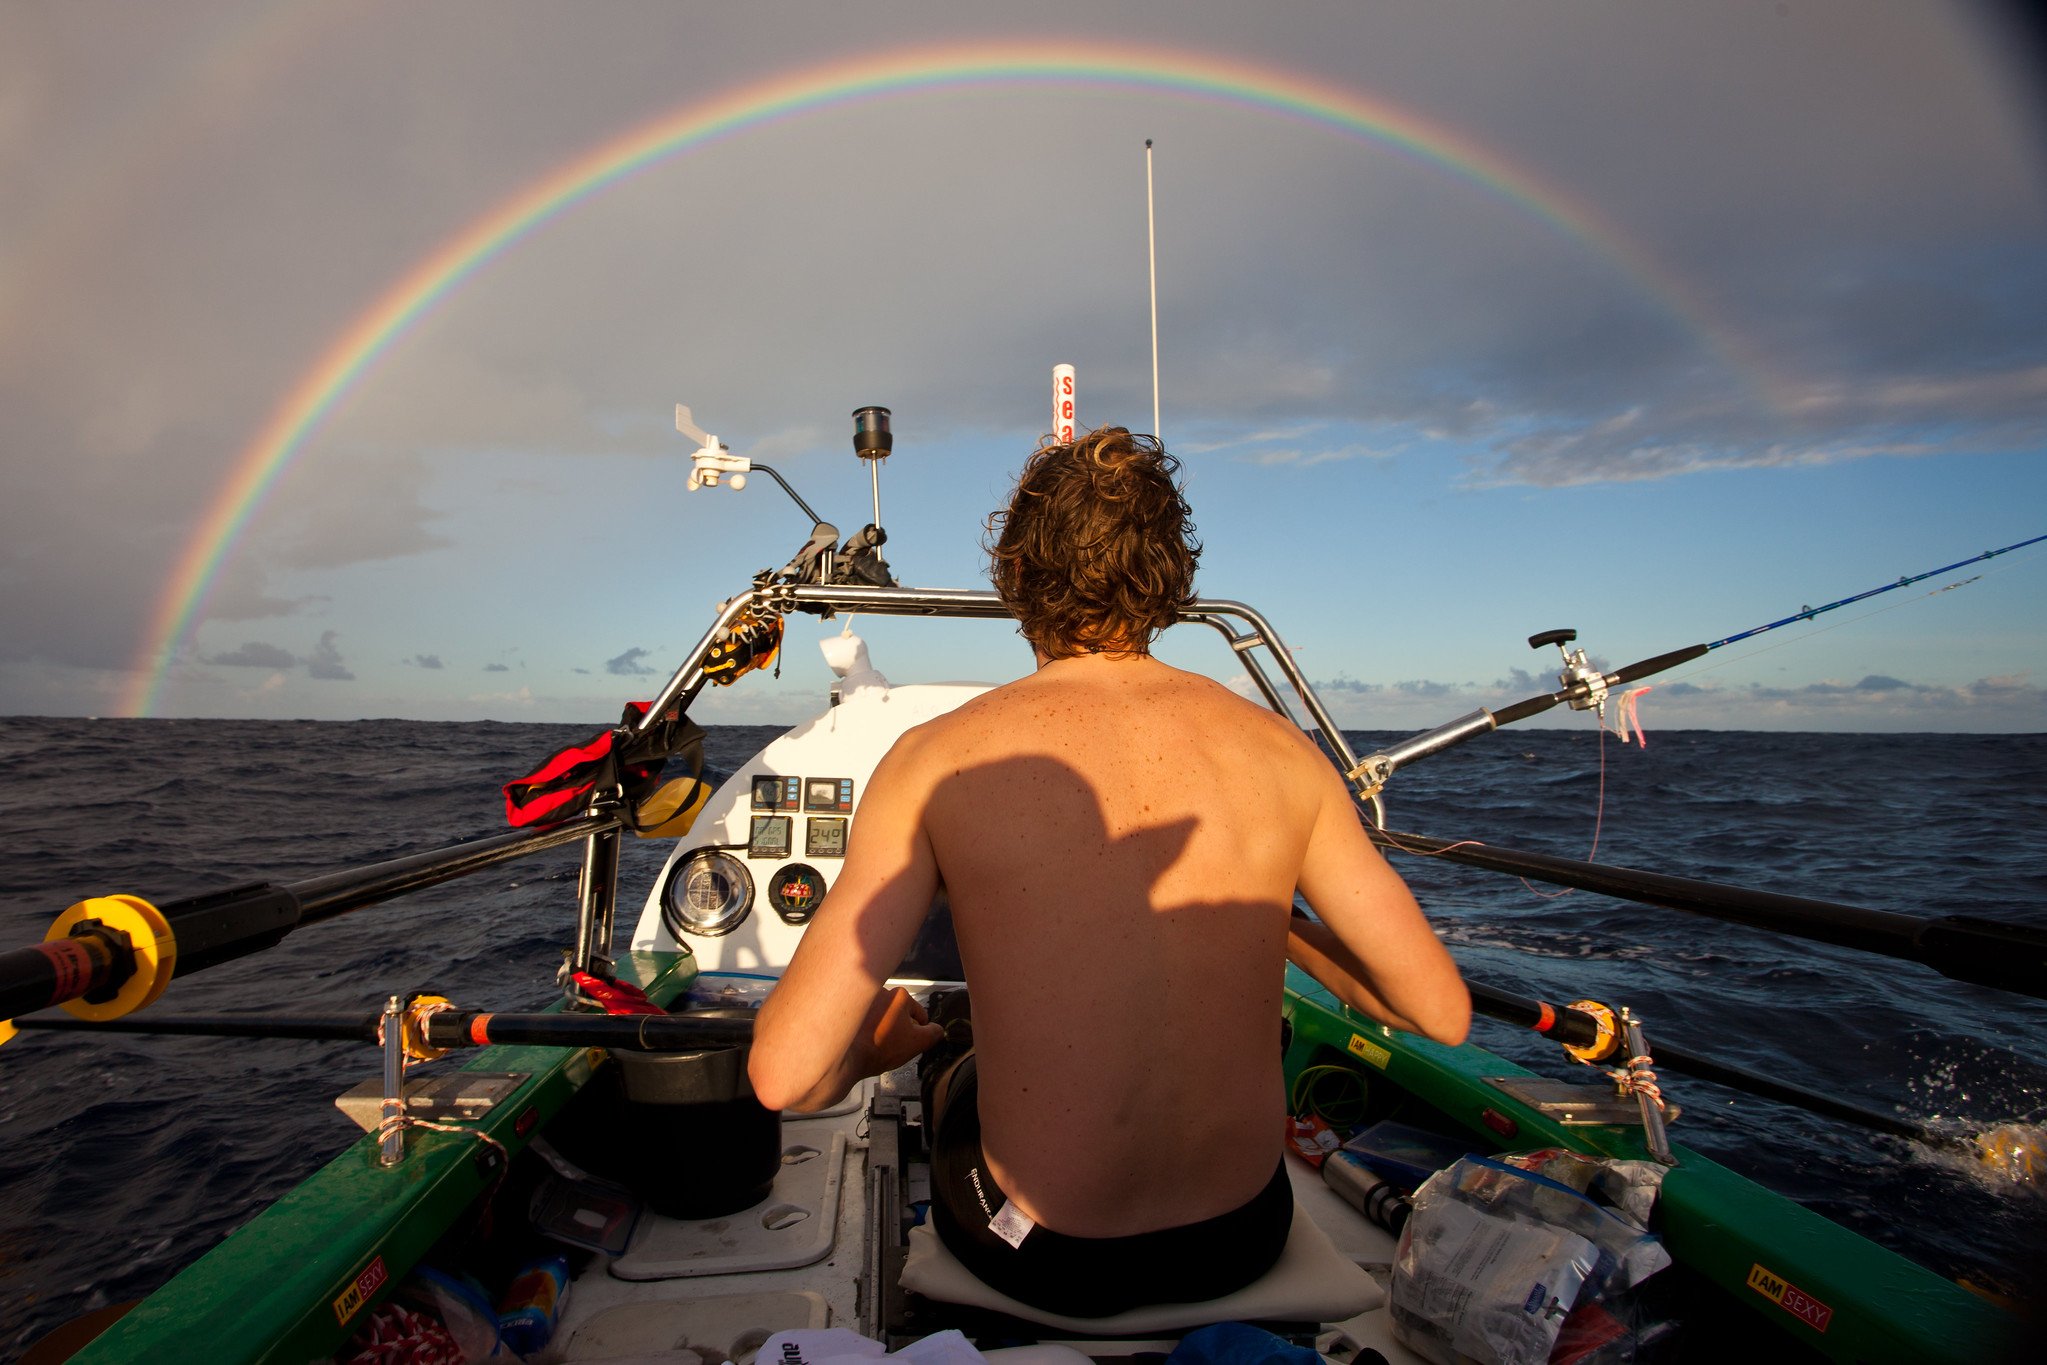 Alistair Humphreys rowing across the Atlantic Ocean, with a rainbow in front of him.